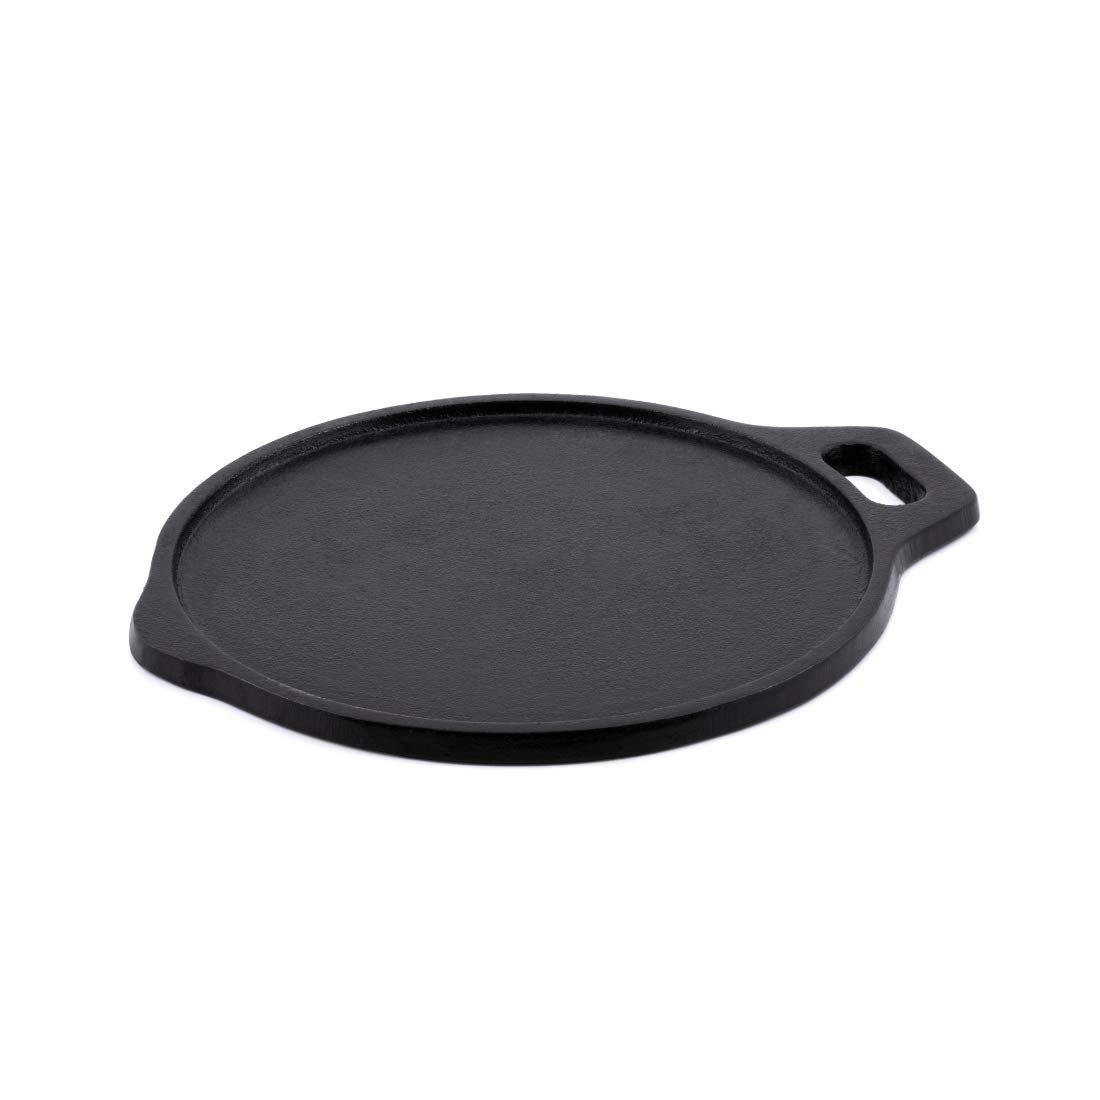 Bhagya Cast Iron Tawa Pre-Seasoned for Dosa/Roti/Chappati | Naturally  Non-Sticky Cookware, Double Seasoned with 100% Gingelly Oil - (11, Classic